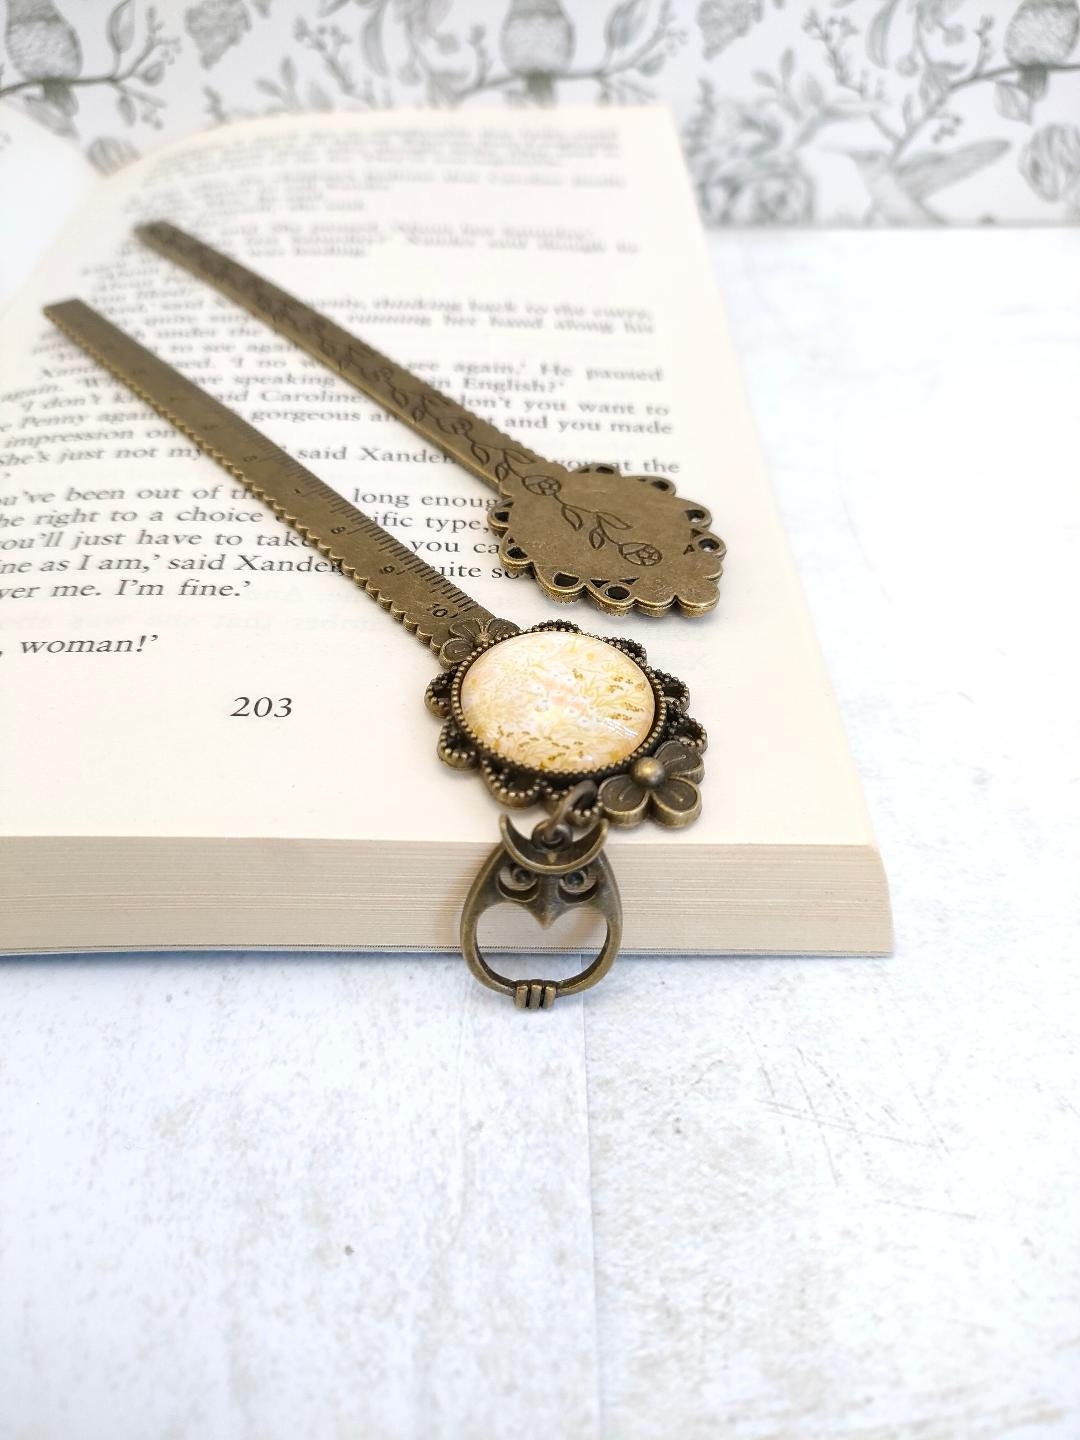 Vintage Floral Print Antique Bronze Tibetan Style Alloy Ruler/Bookmarks, Gift for Book Lovers, Book accessories and Gfits